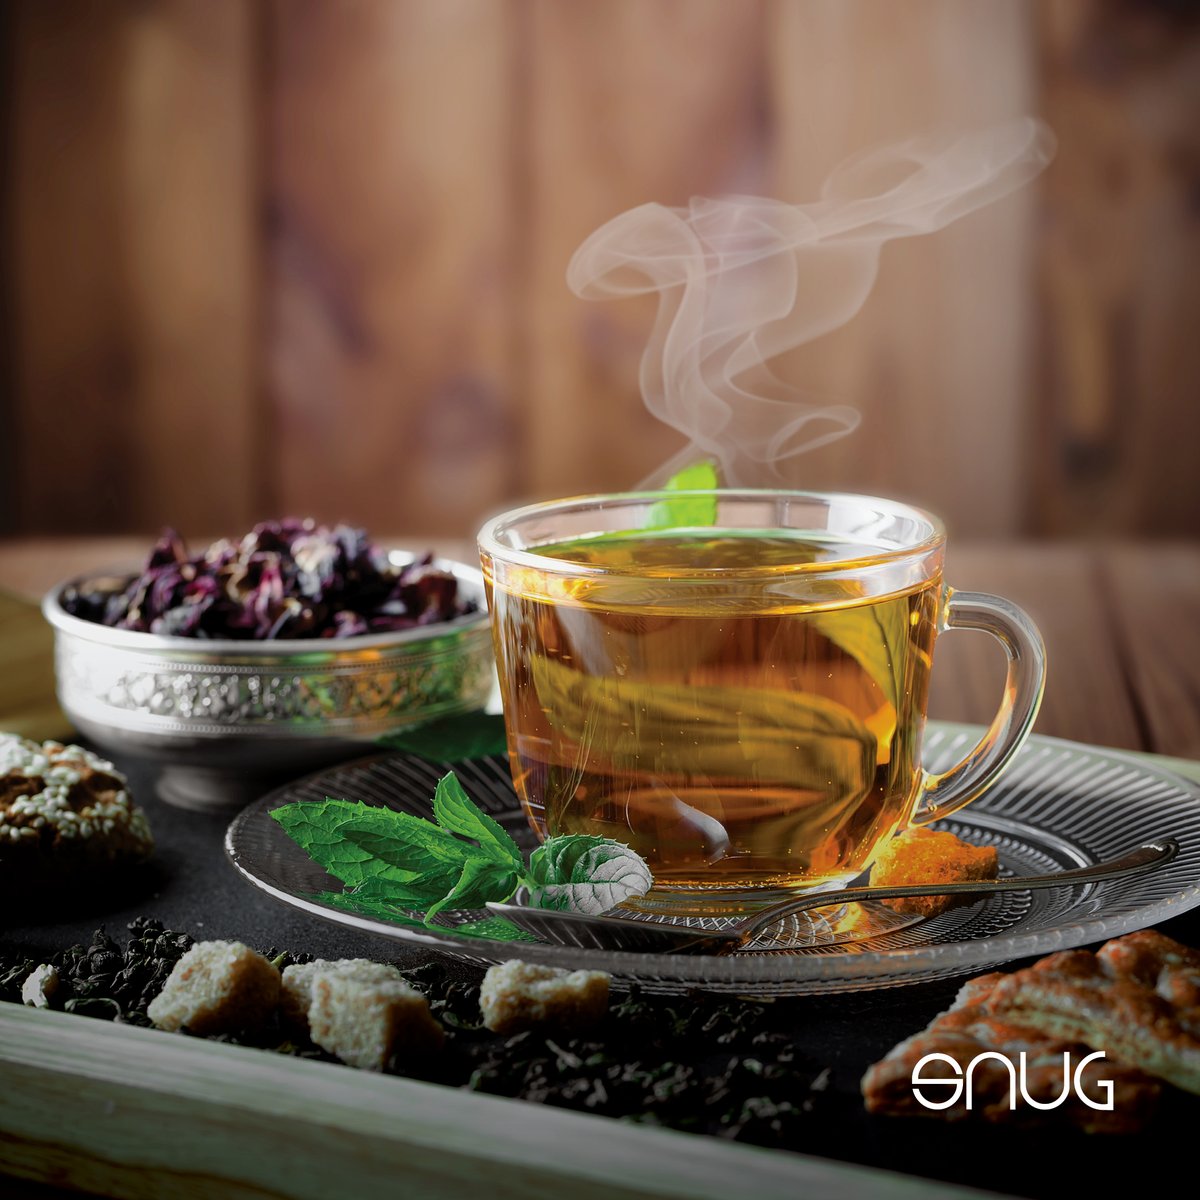 Nature's soothing embrace awaits you at Snug lobby lounge's Herbal Tea Station. Sip on serenity with a curated selection of herbal infusions, each cup a journey of relaxation and wellness. 

#corpamman #hmhhotelgroup #amman #tea #tealover #afternoontea